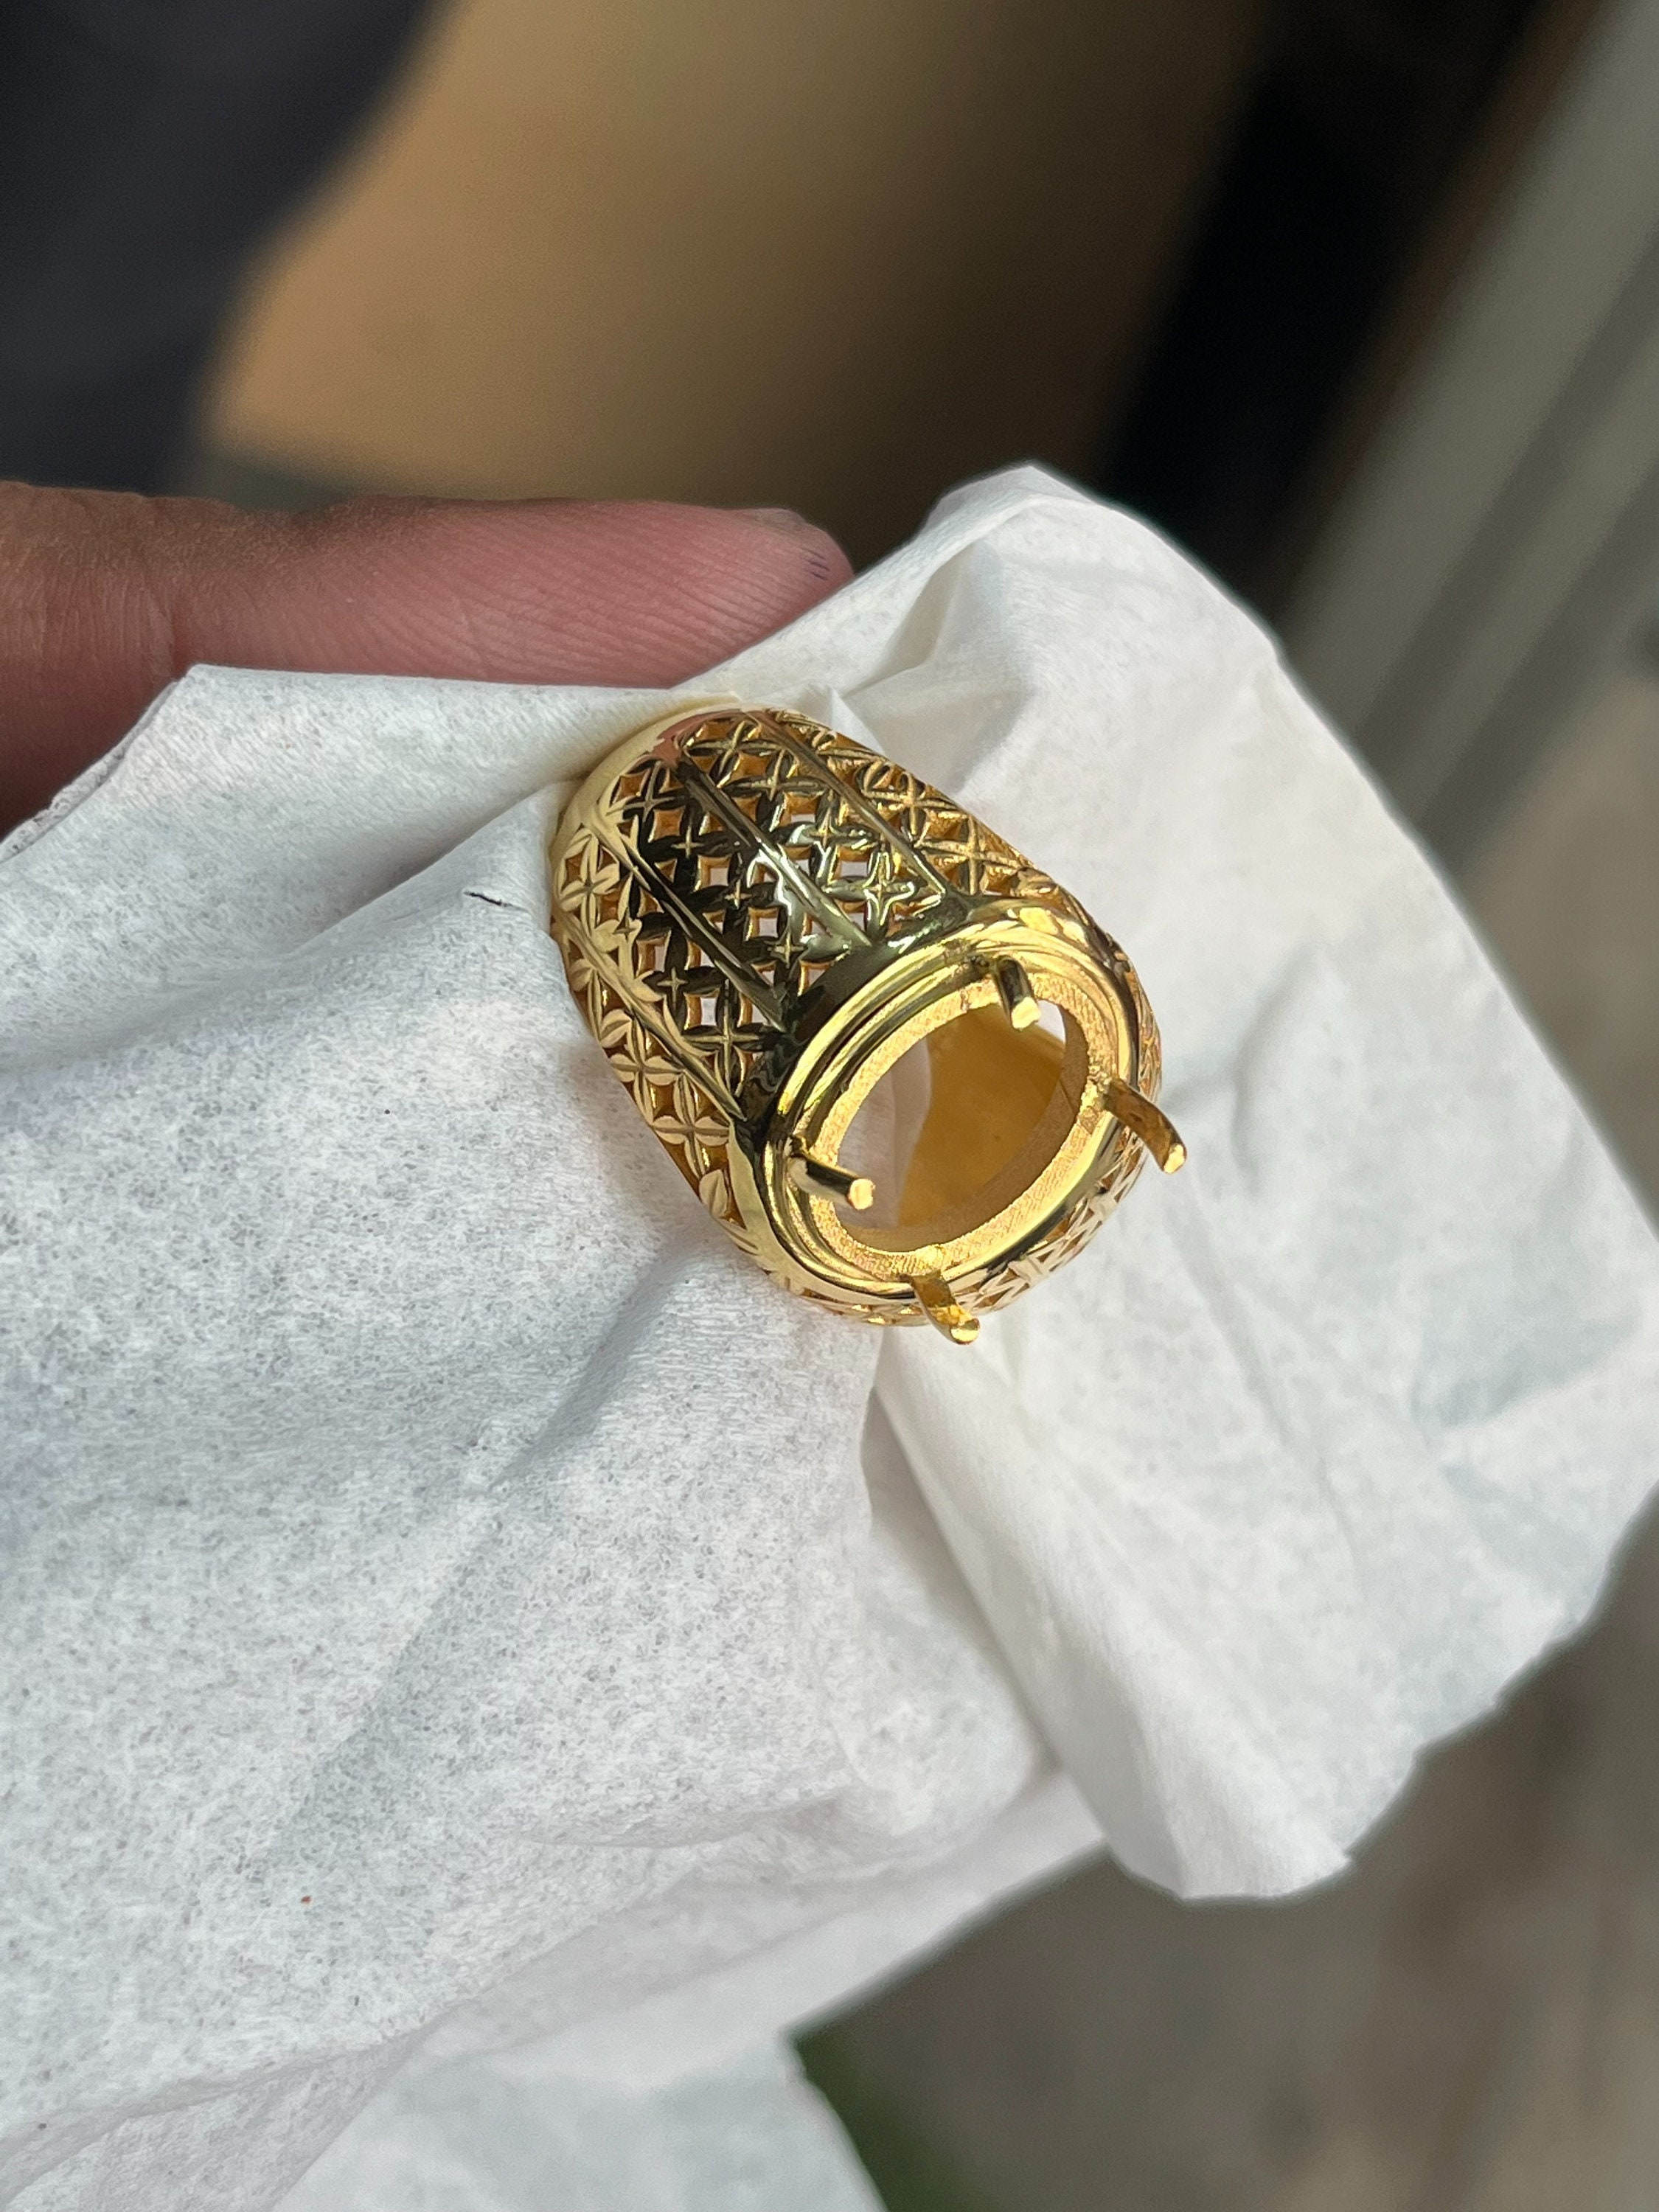 Gold Plated Ring India Temple Ring Antique India Jewelry Ring India Gold  Jewelry Temple Jewelry South India Gold Jewellery Big Ring Women 